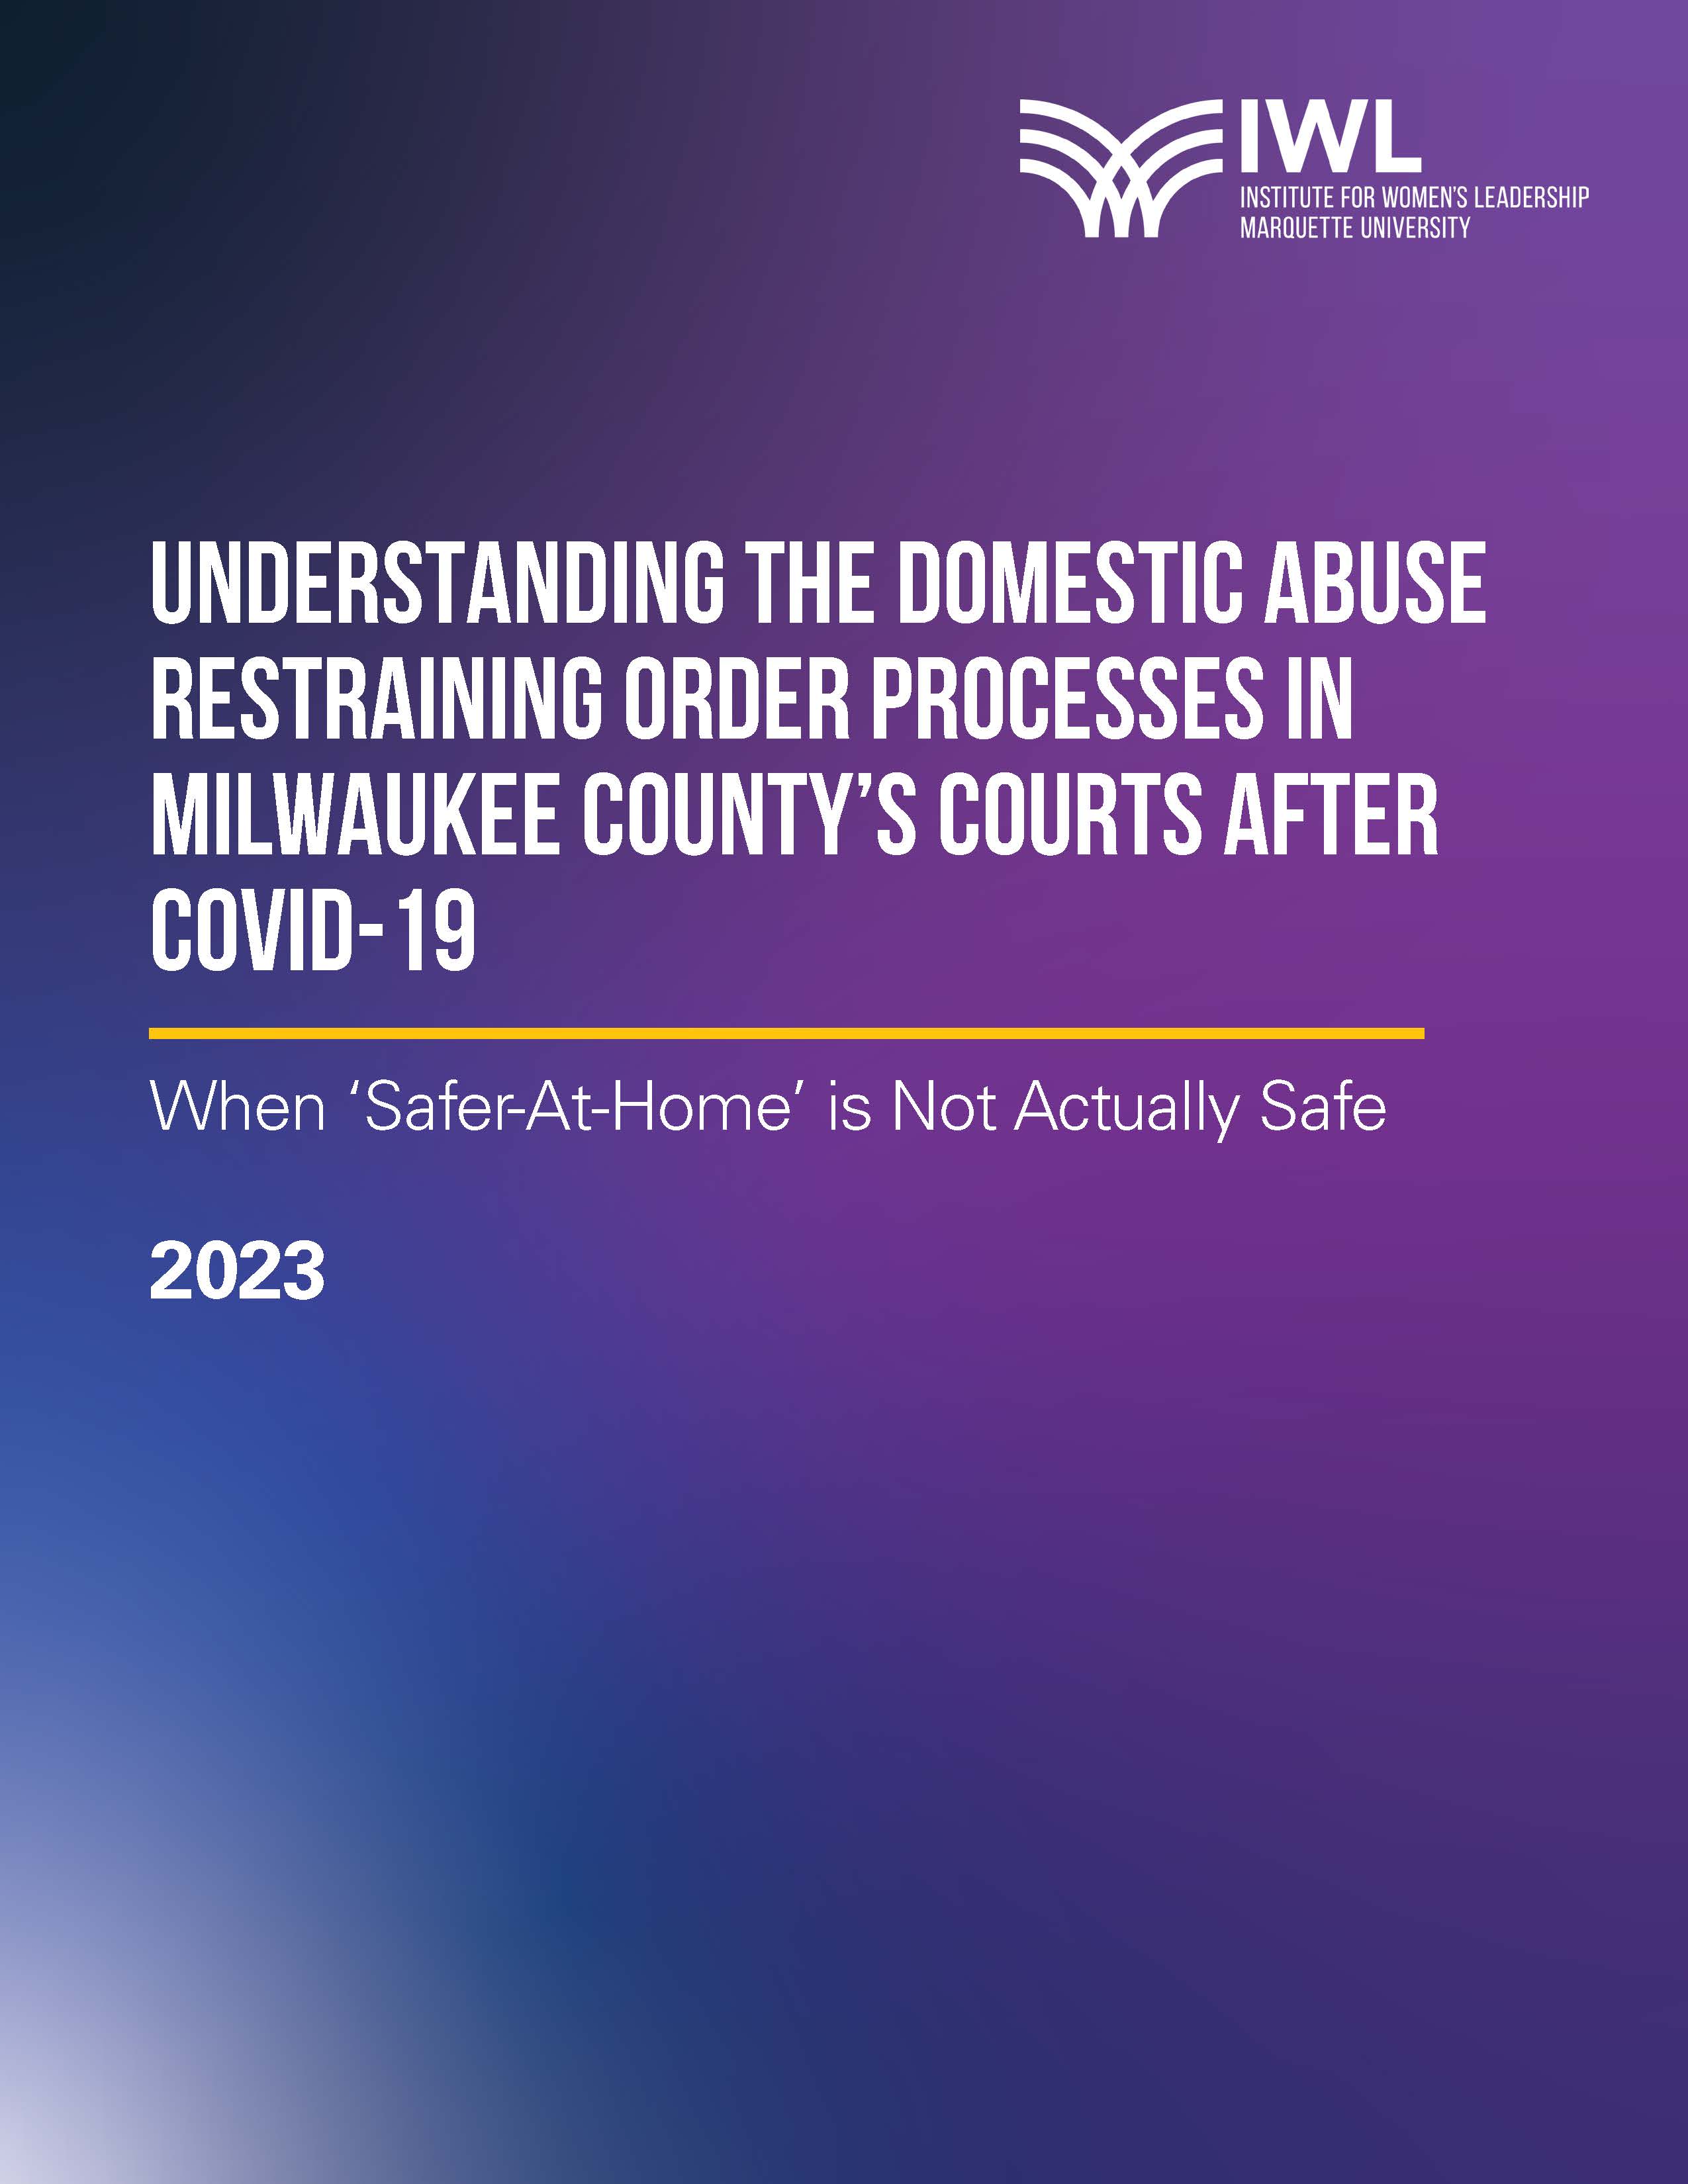 Front cover of "Understanding the Domestic Abuse Restraining Order Processes in Milwaukee County’s Court After COVID-19"